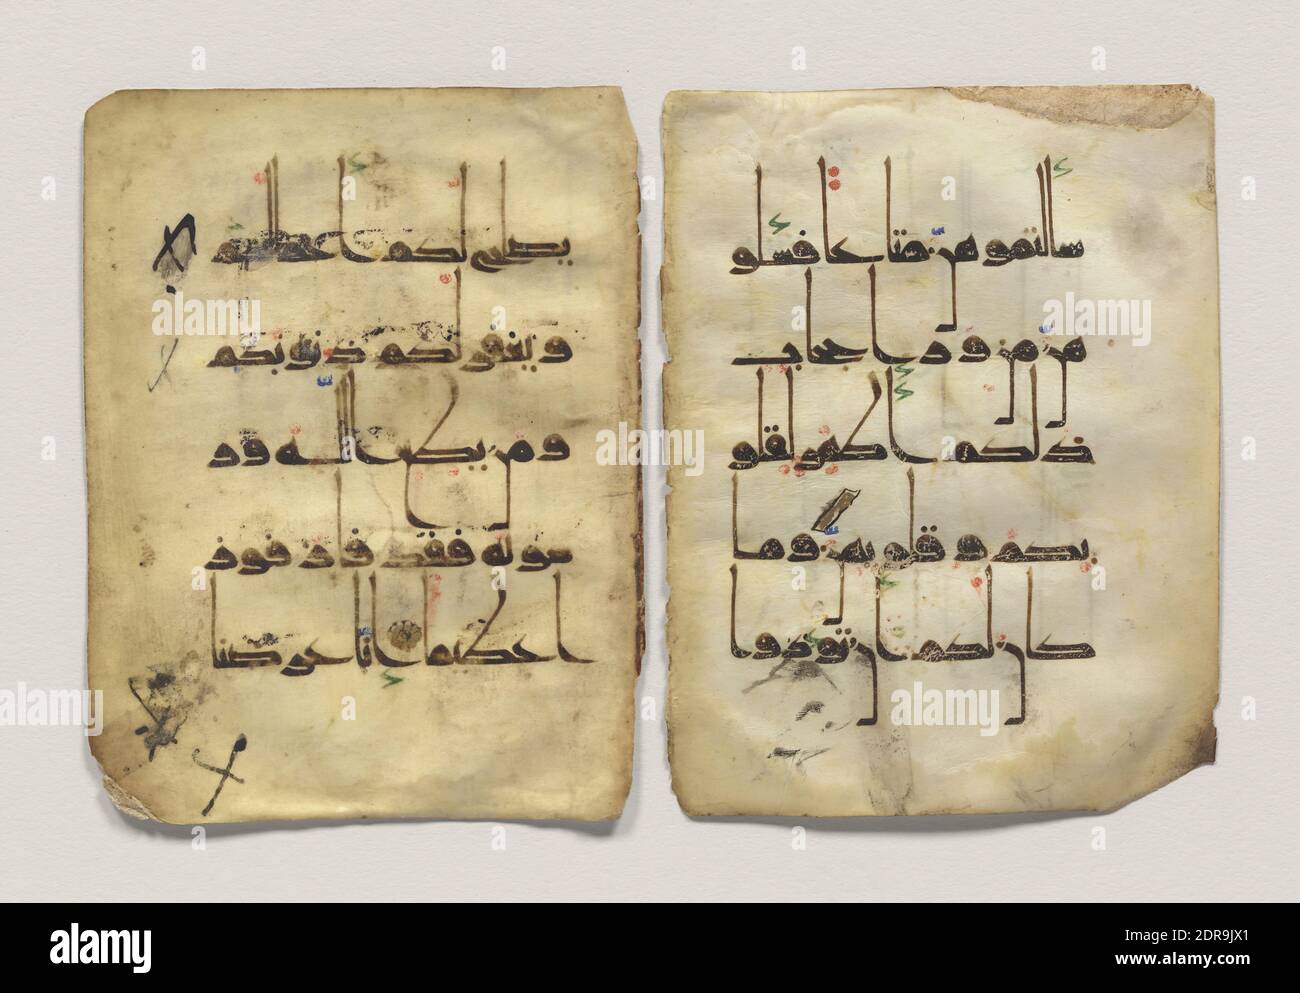 Double Leaves of a Qur’an in Kufic Script, 12th century, Ink on deerskin, A: 5 5/8 × 4 5/16 in. (14.3 × 10.9 cm), Iranian/Persian, Islamic, Seljuq period (1037 - 1194), Calligraphy Stock Photo